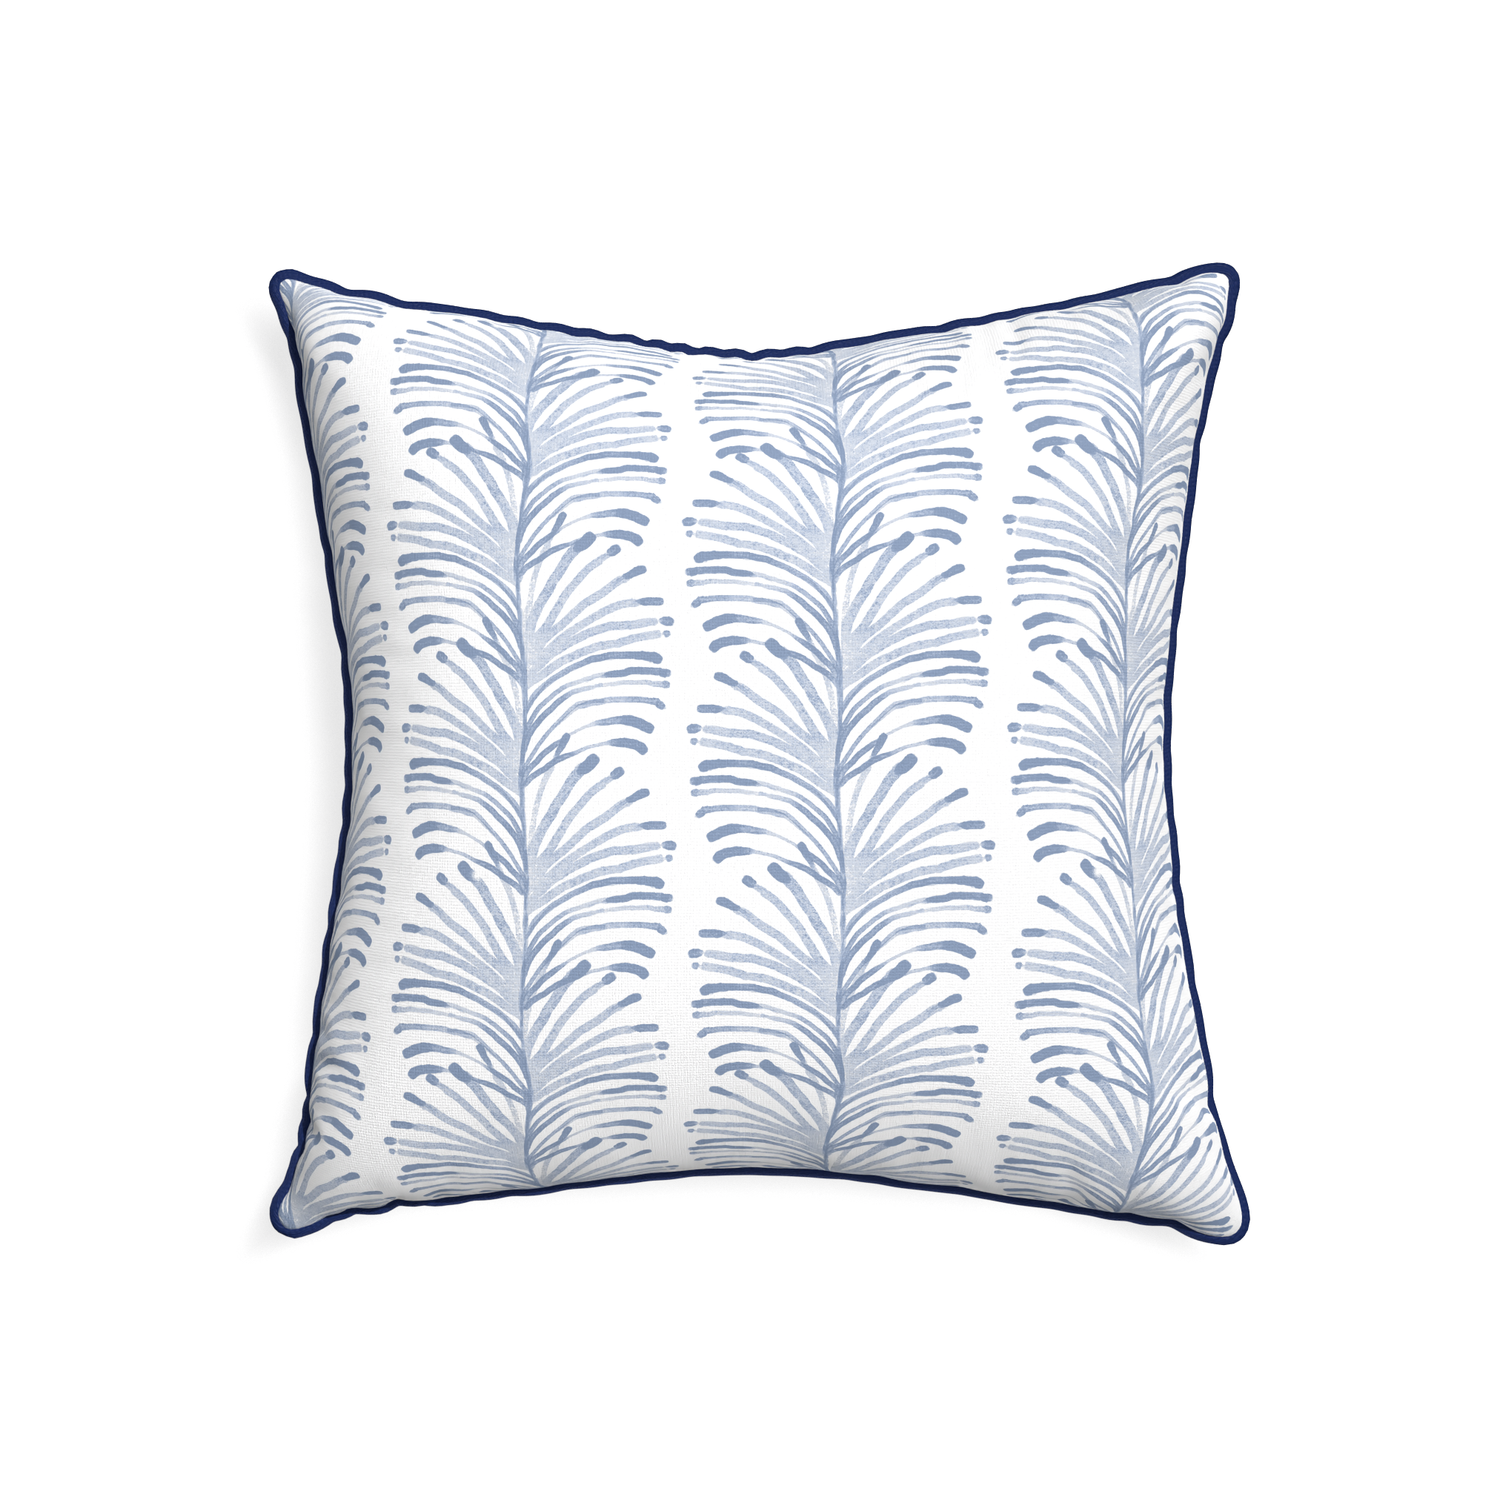 22-square emma sky custom pillow with midnight piping on white background